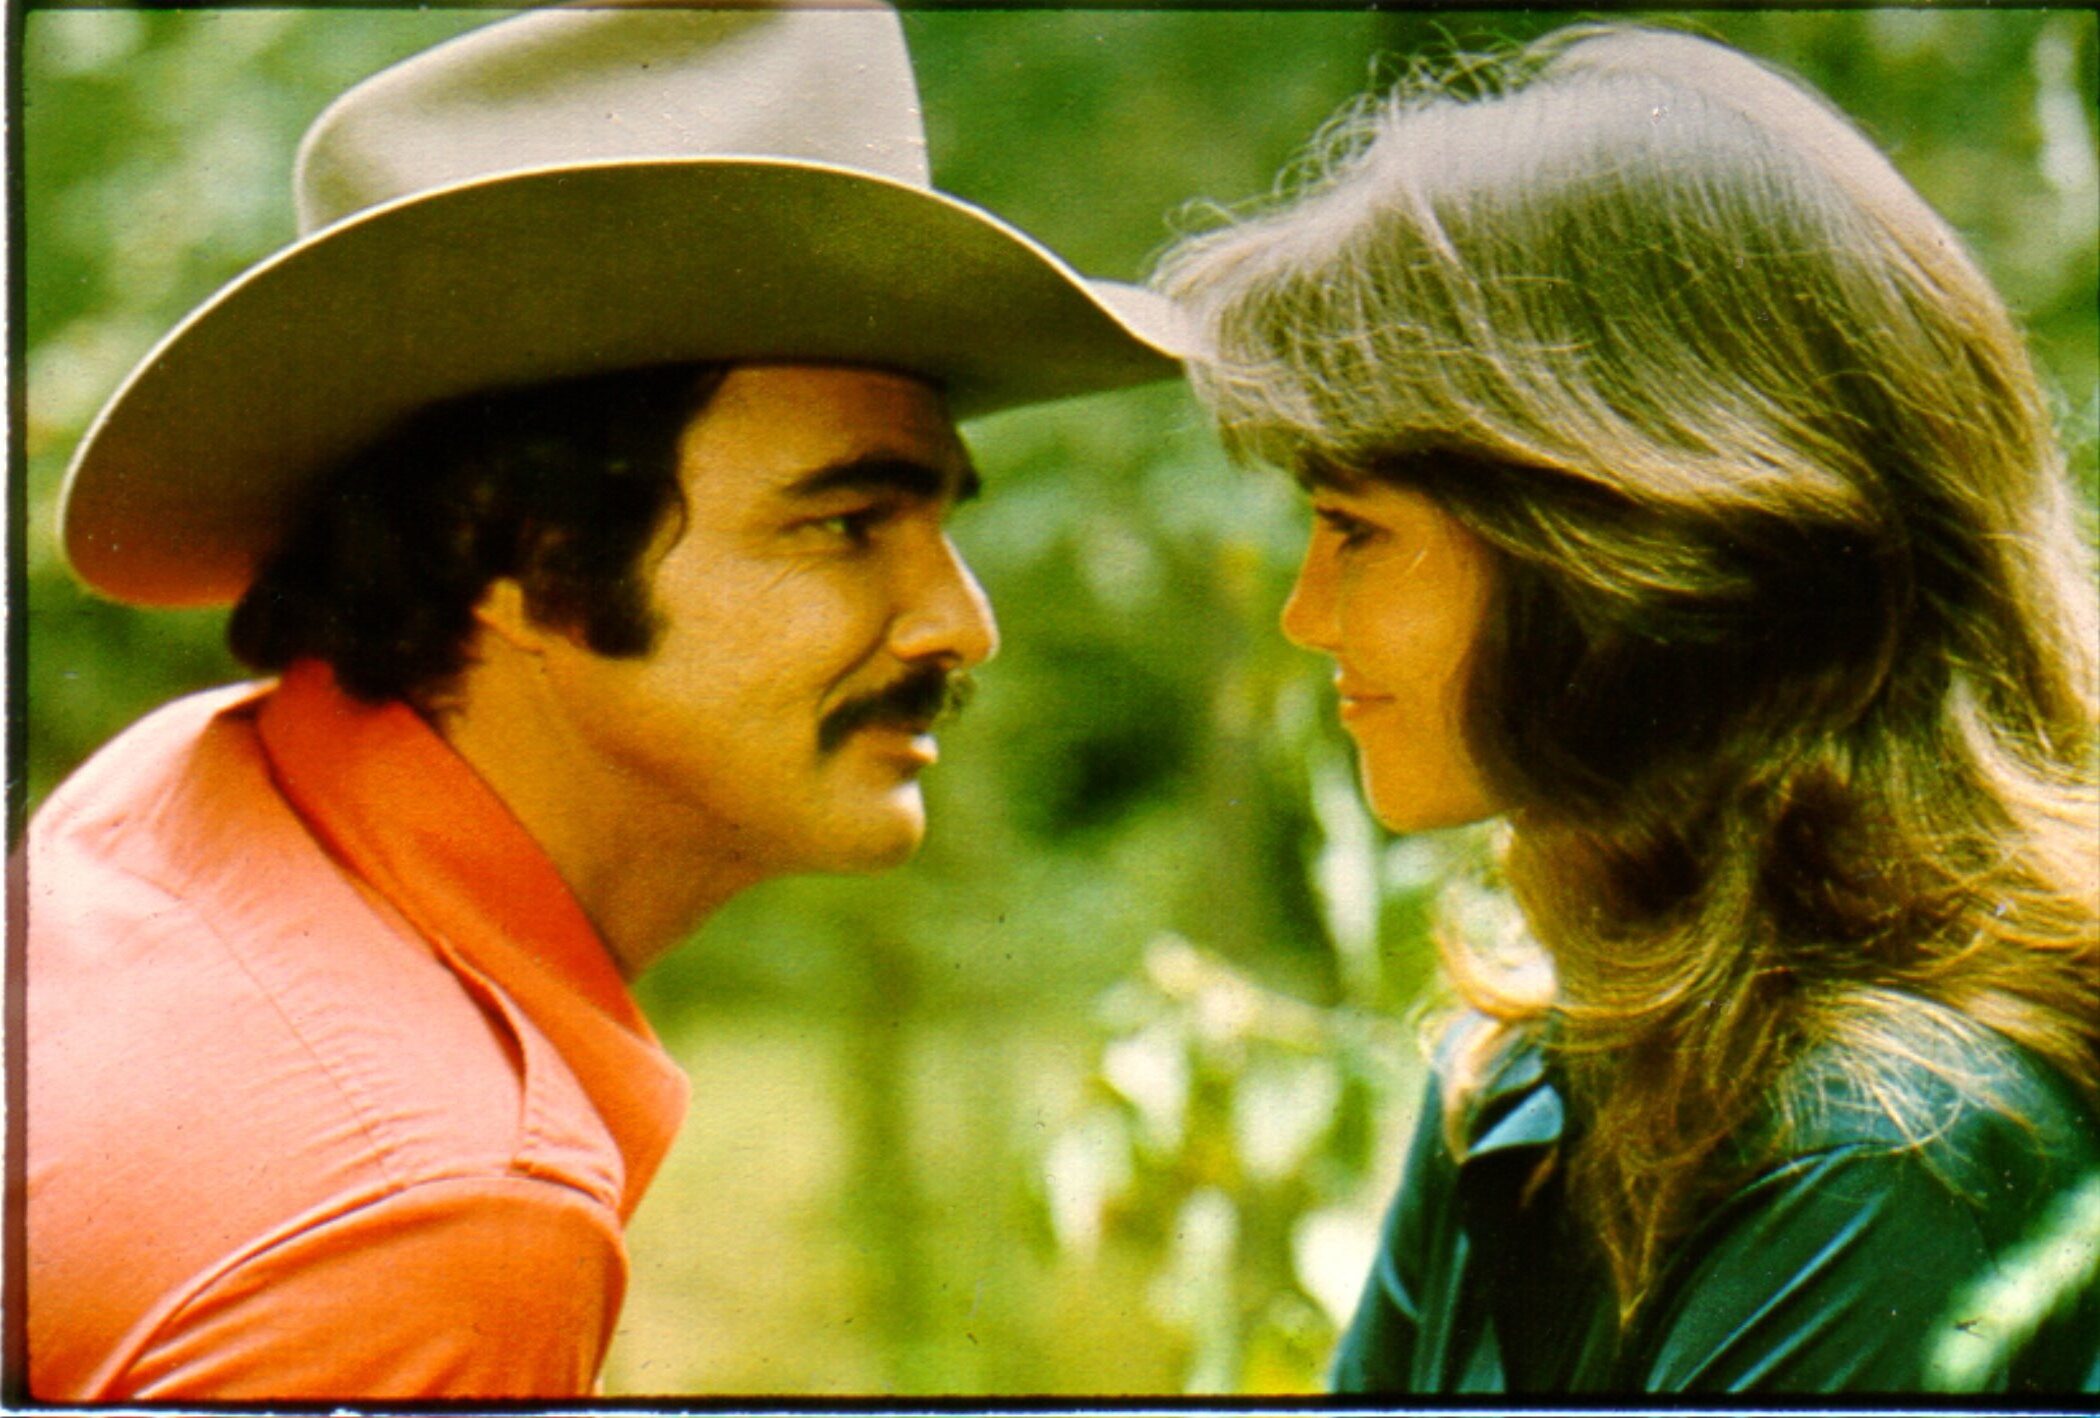 Burt Reynolds’ Family Allegedly Furious With Sally Field For Recent Supposed Jabs, Suspicious Source Says